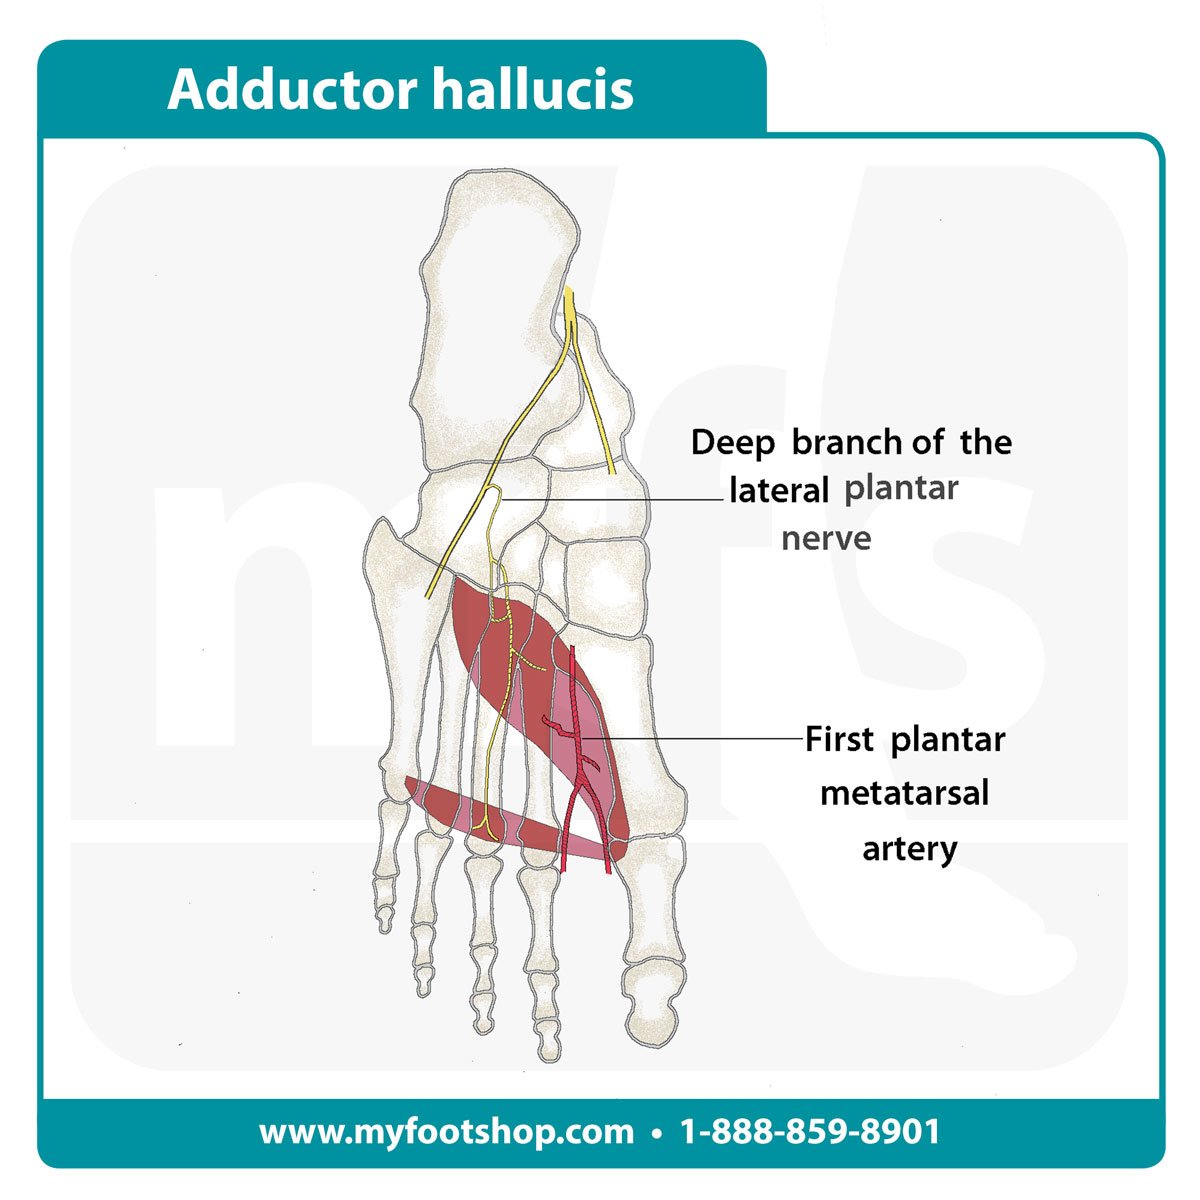 image of the adductor hallucis muscle